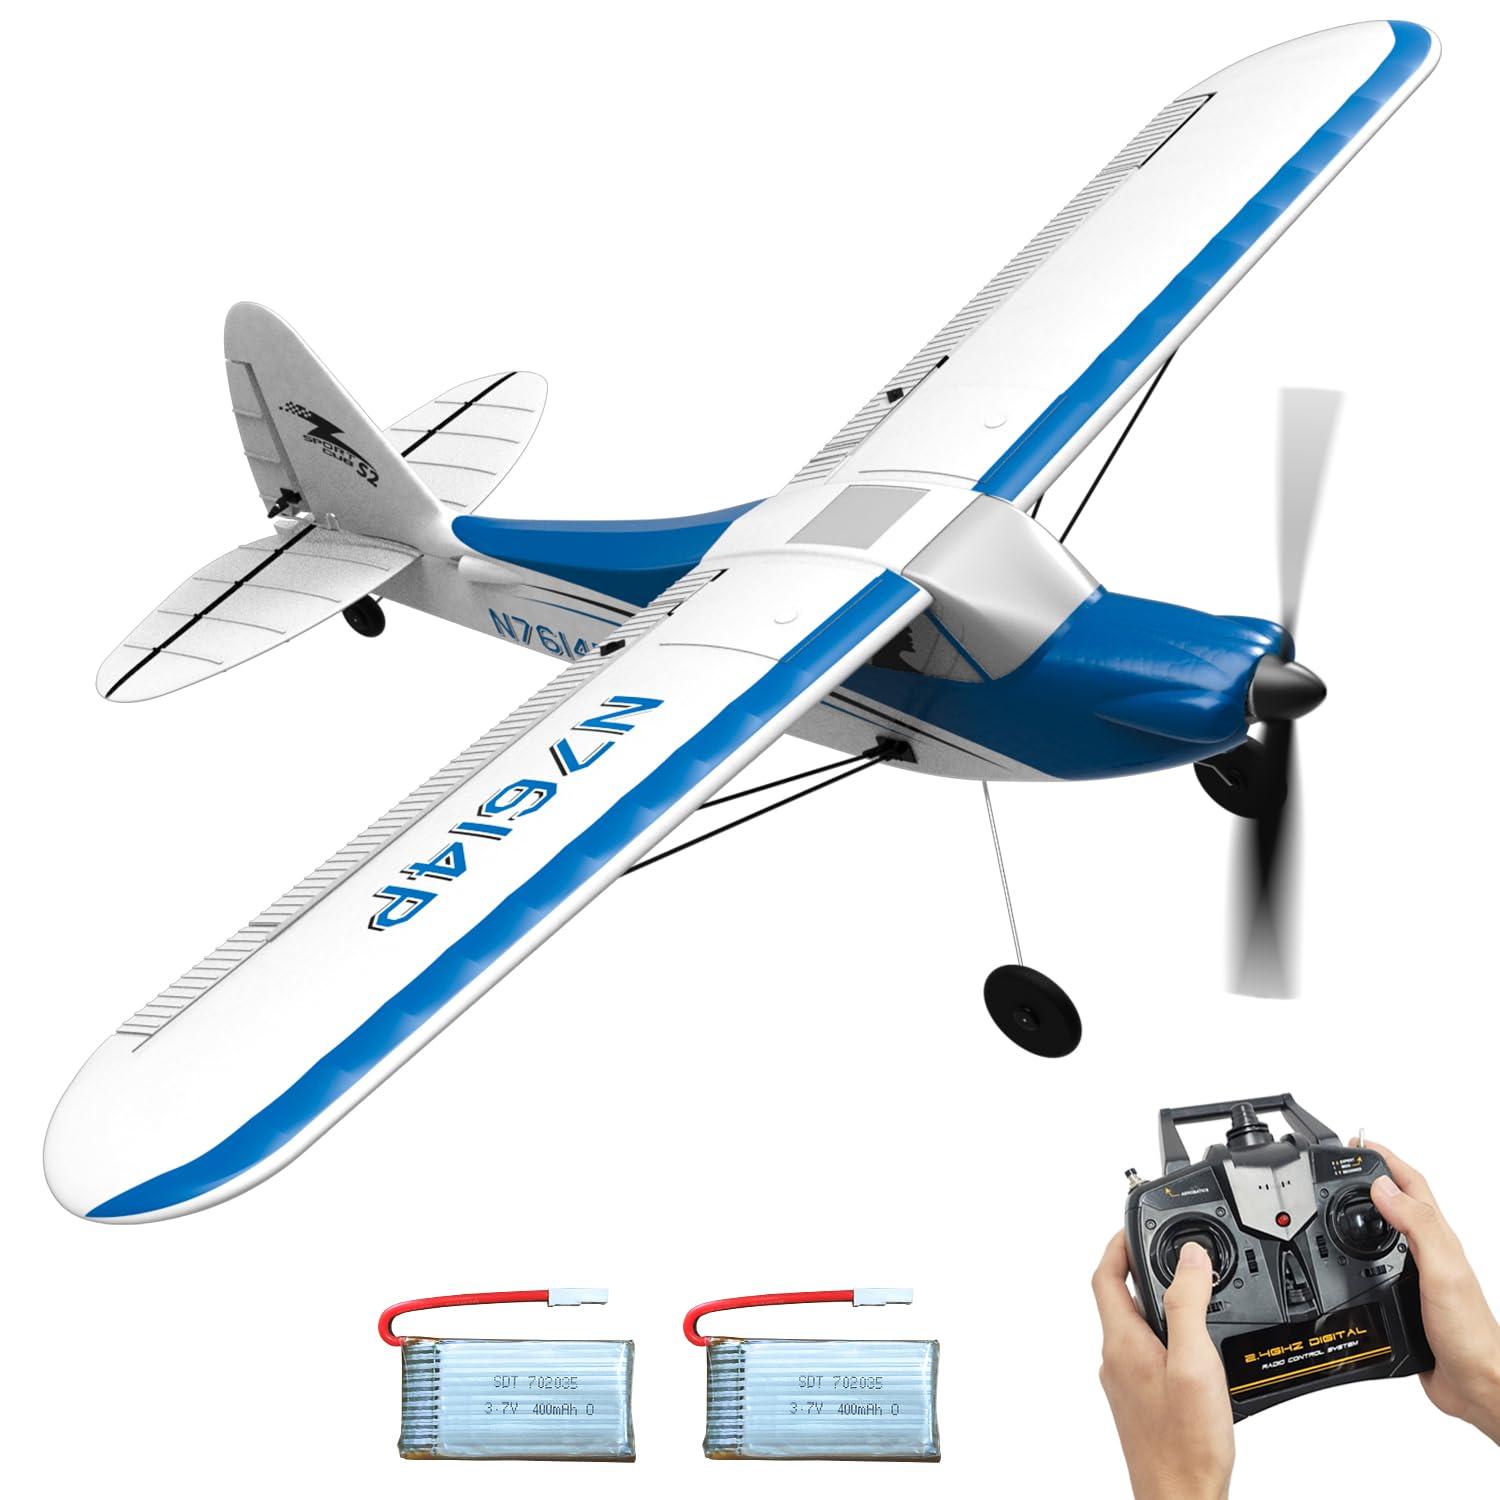 Best Cheap Rc Plane: Beginner tips for choosing and mastering a budget-friendly RC plane